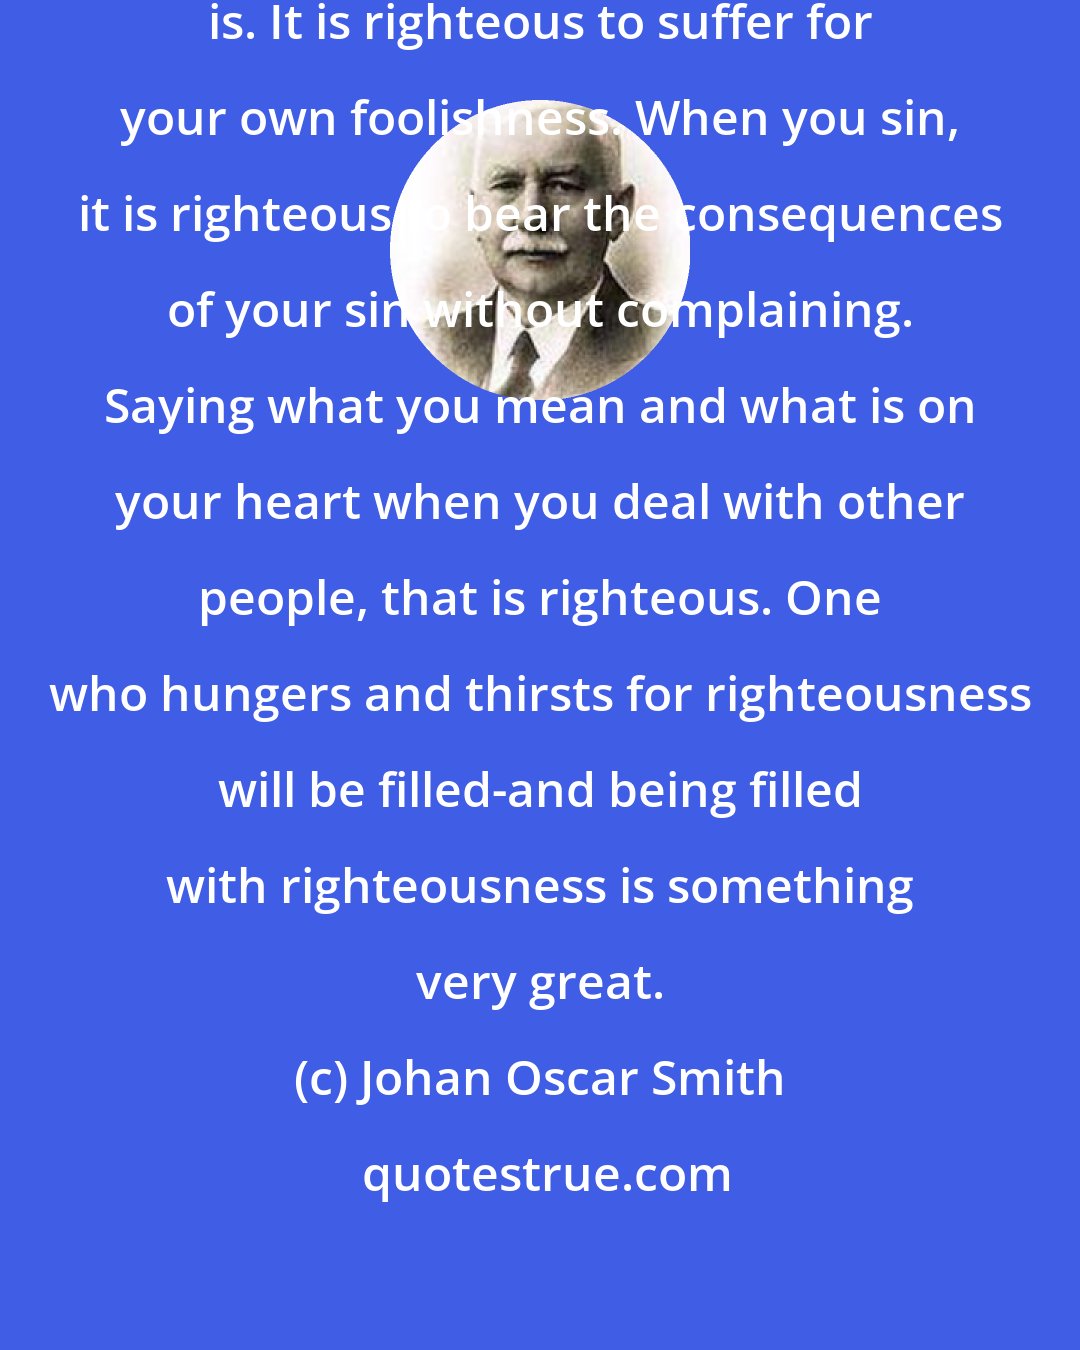 Johan Oscar Smith: Only few know what righteousness is. It is righteous to suffer for your own foolishness. When you sin, it is righteous to bear the consequences of your sin without complaining. Saying what you mean and what is on your heart when you deal with other people, that is righteous. One who hungers and thirsts for righteousness will be filled-and being filled with righteousness is something very great.